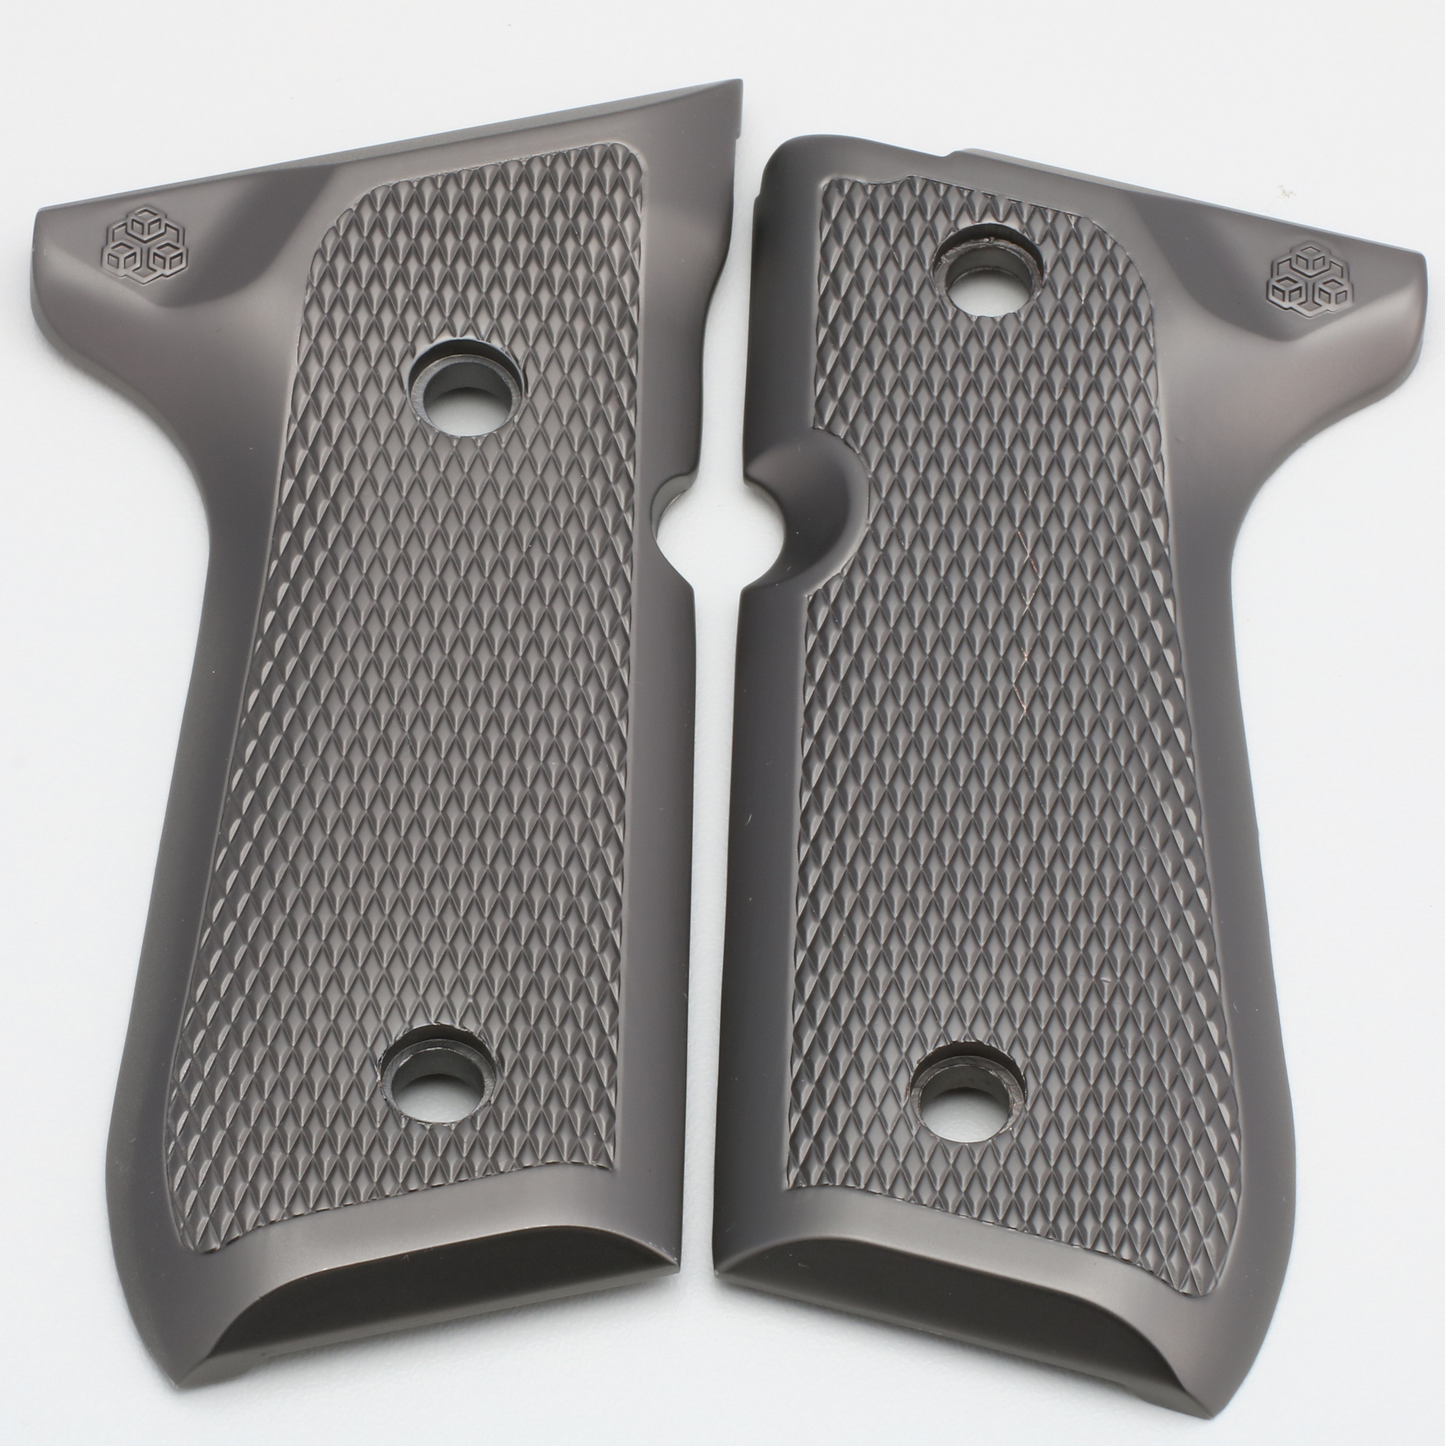 Beretta Grips PEWTER GRIPS 92/96 Series Pistols 92F, 92FS, M9, 96 Brushed Nickel screws included